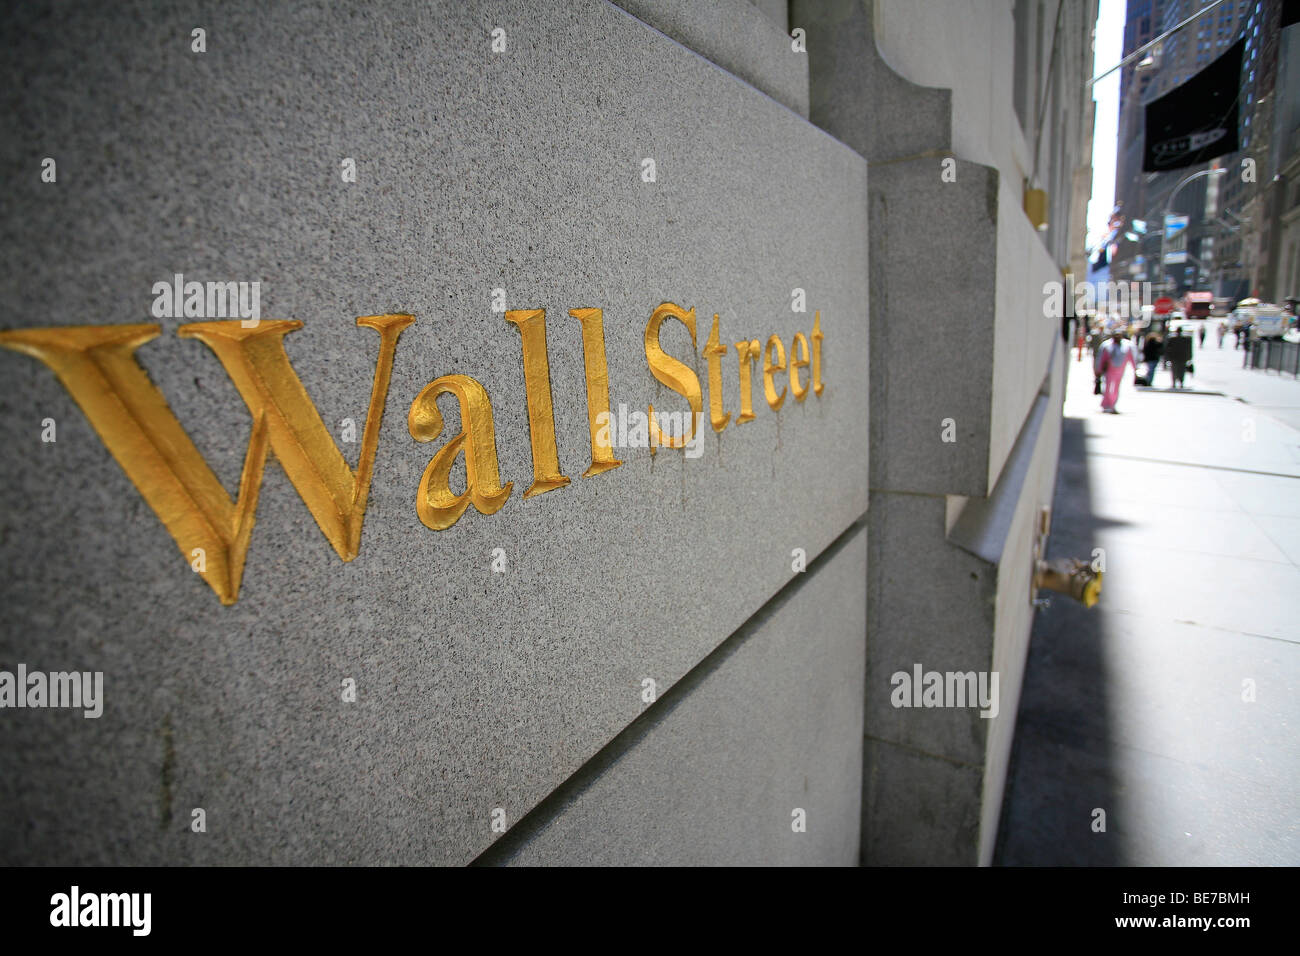 Golden Wall street sign carved on a wall in the financial district area of downtown Manhattan in New York city, united states. Stock Photo